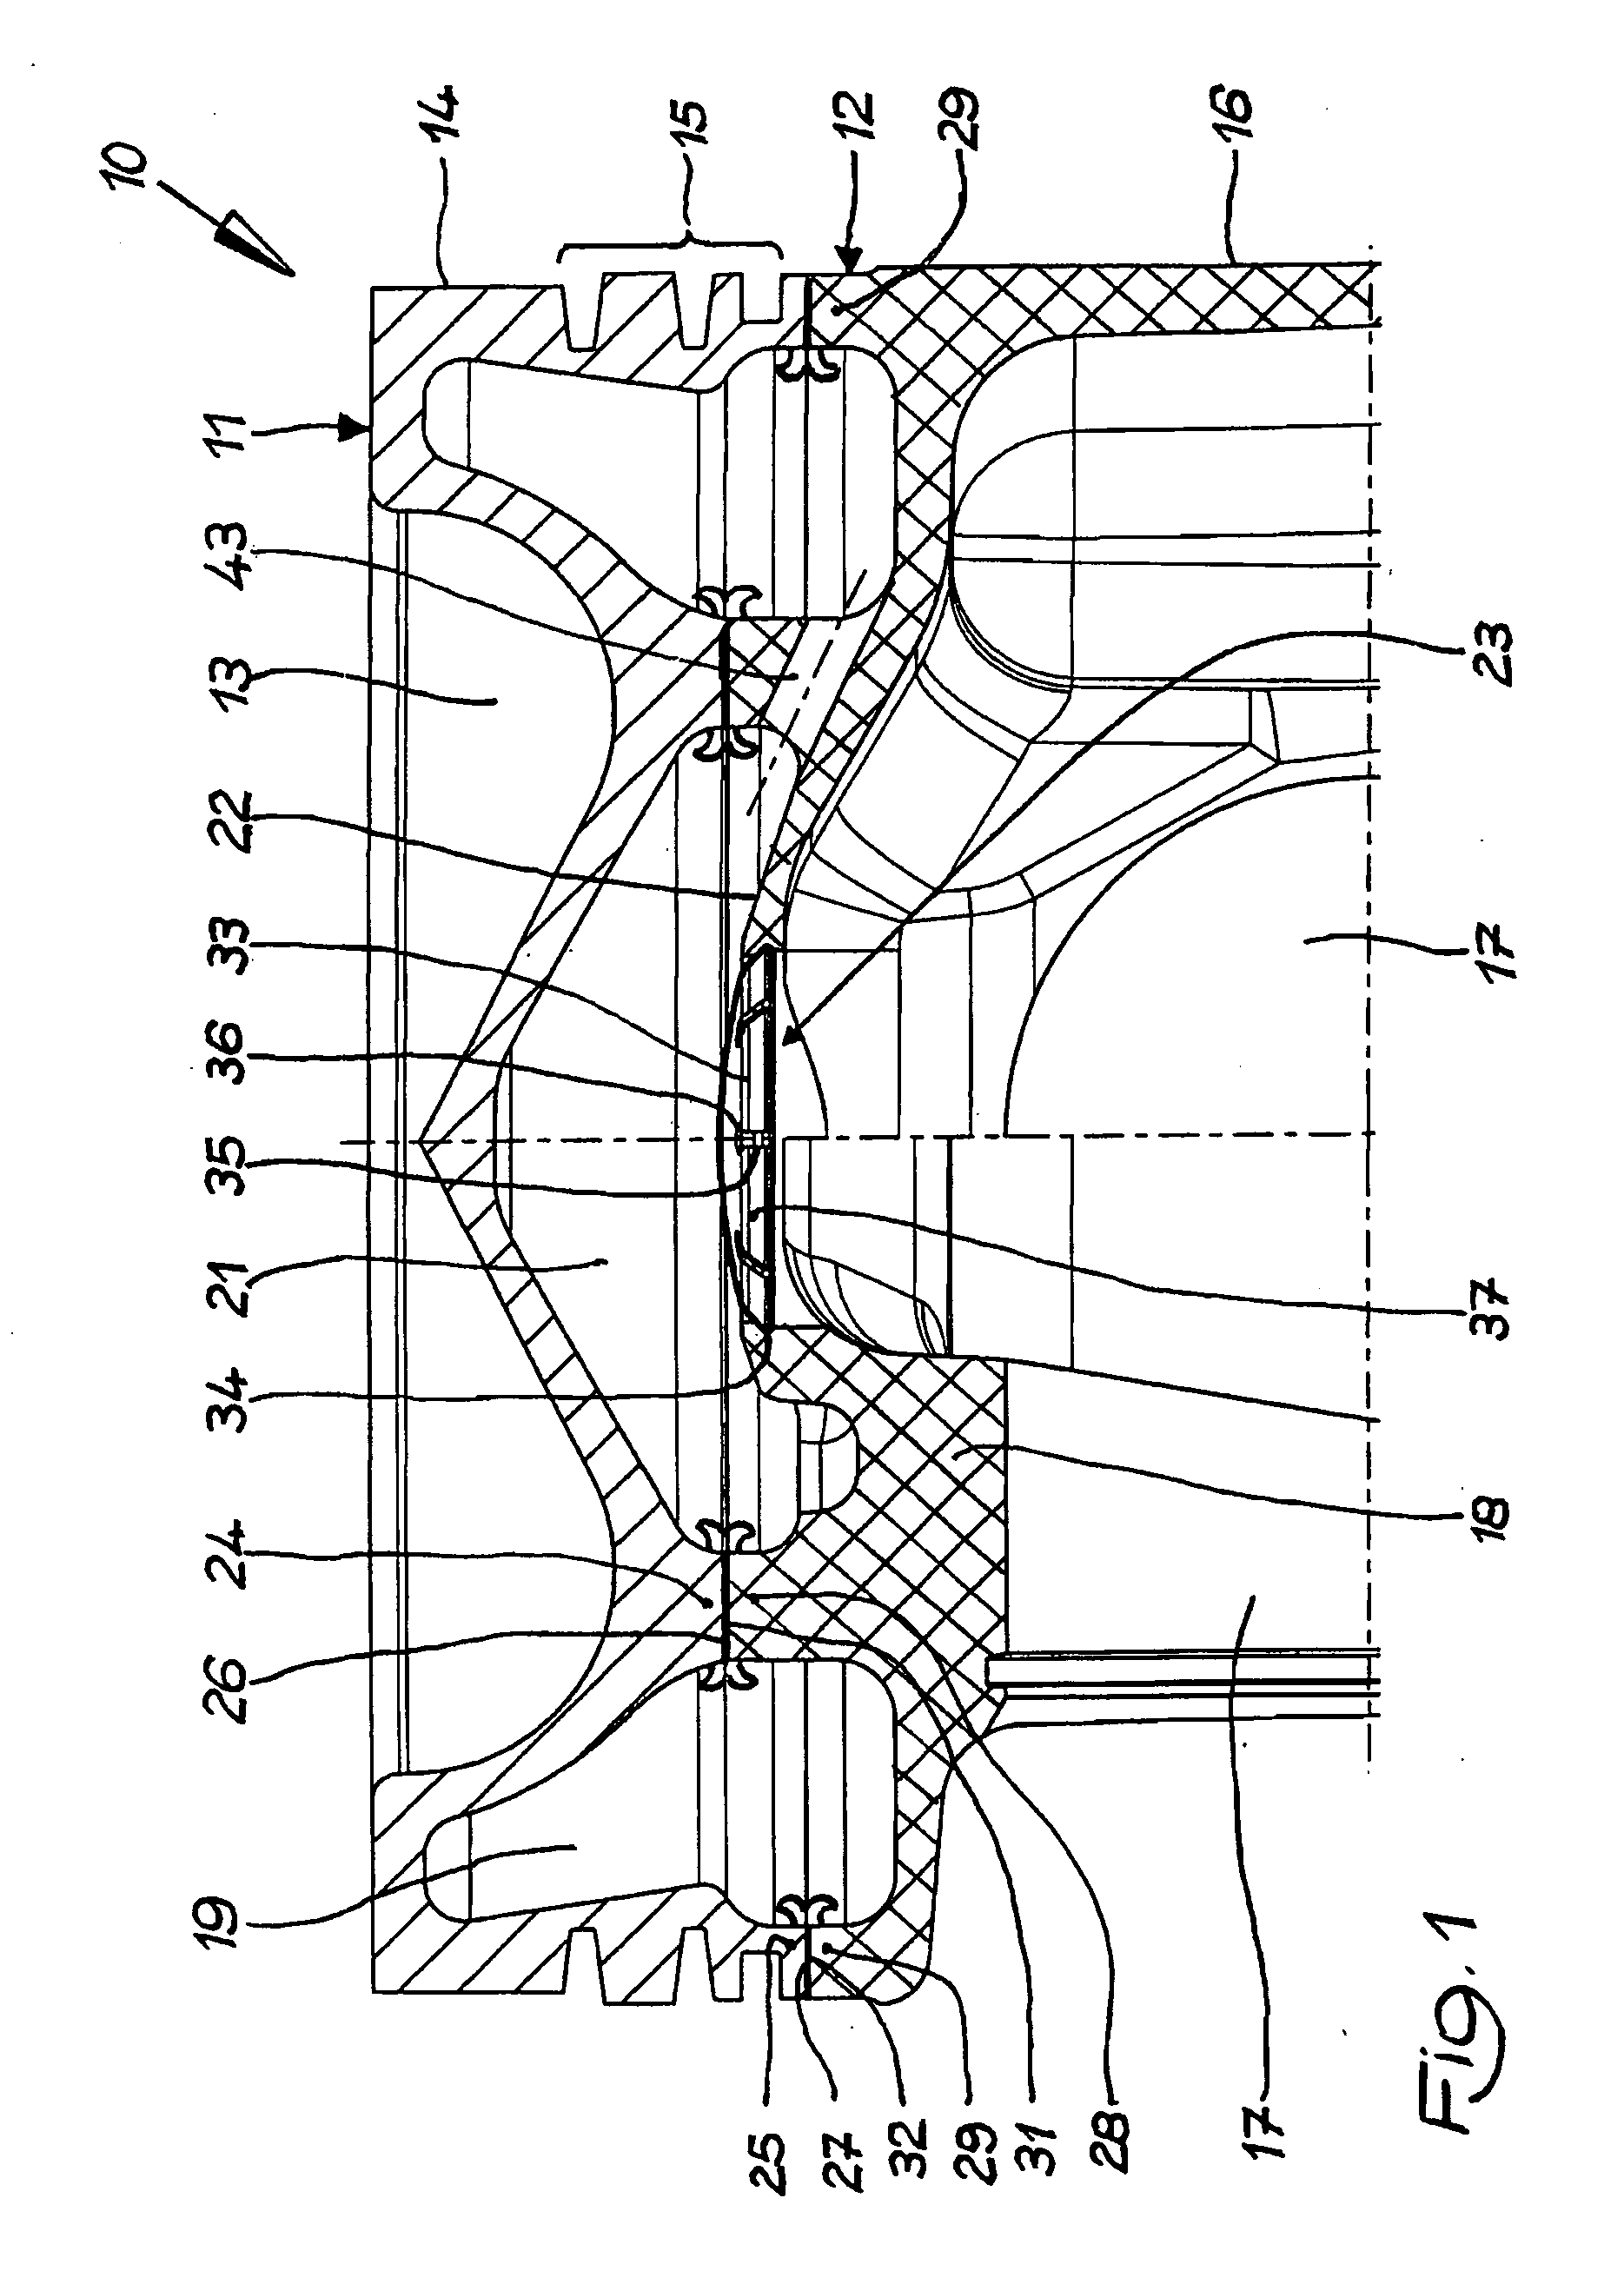 Multi-part piston for an internal combustion engine